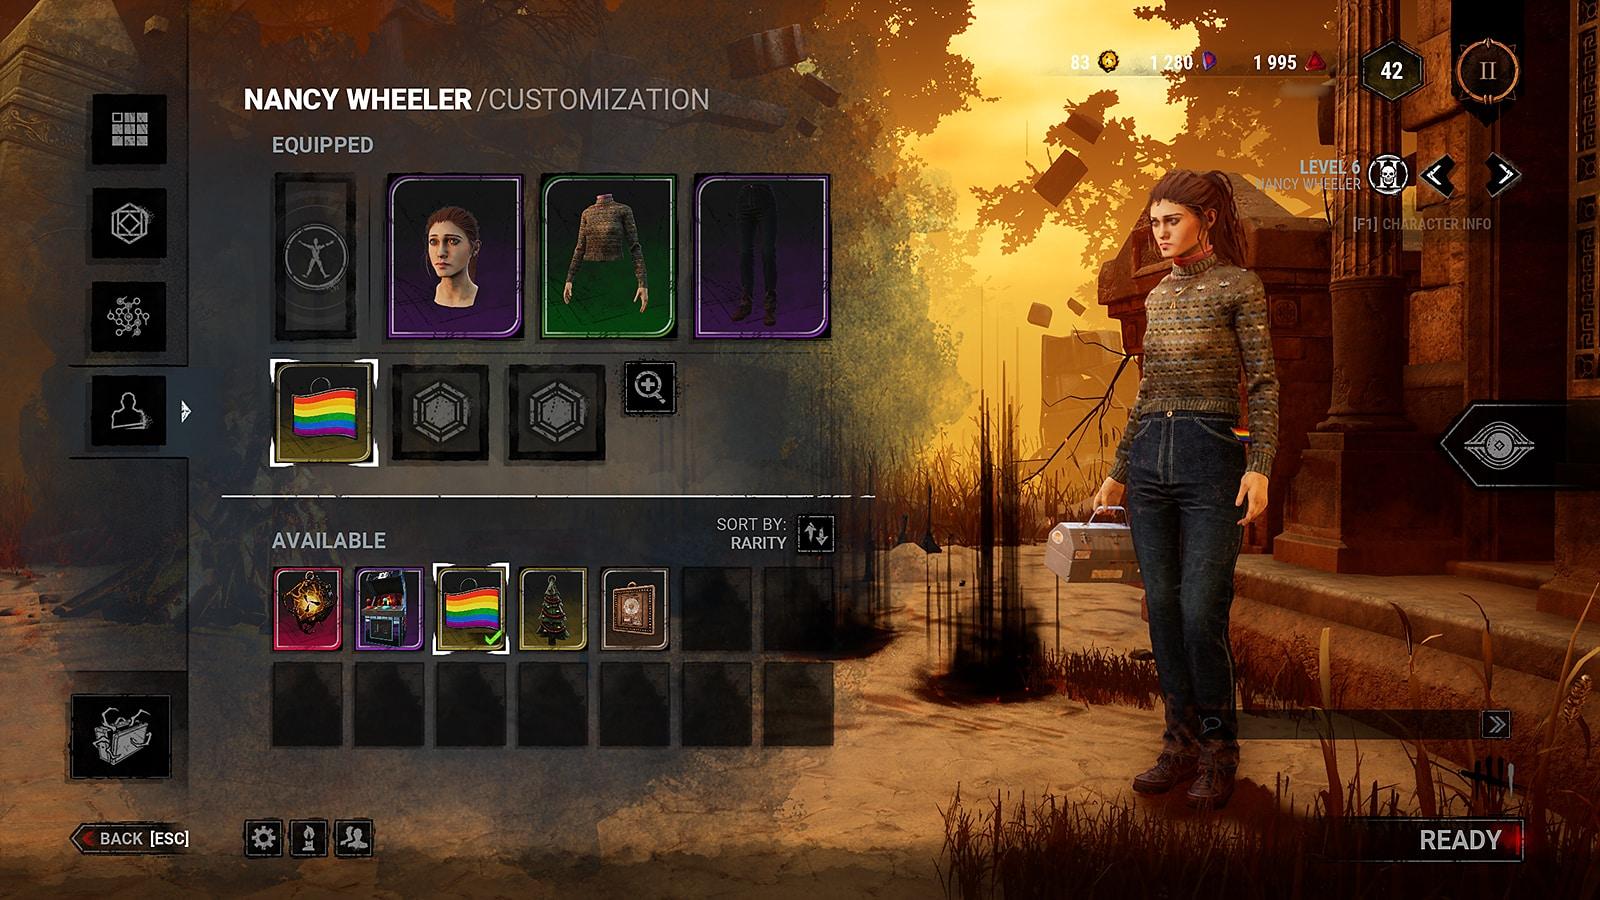 An image of the Pride charm in DBD which can be unlocked with a code